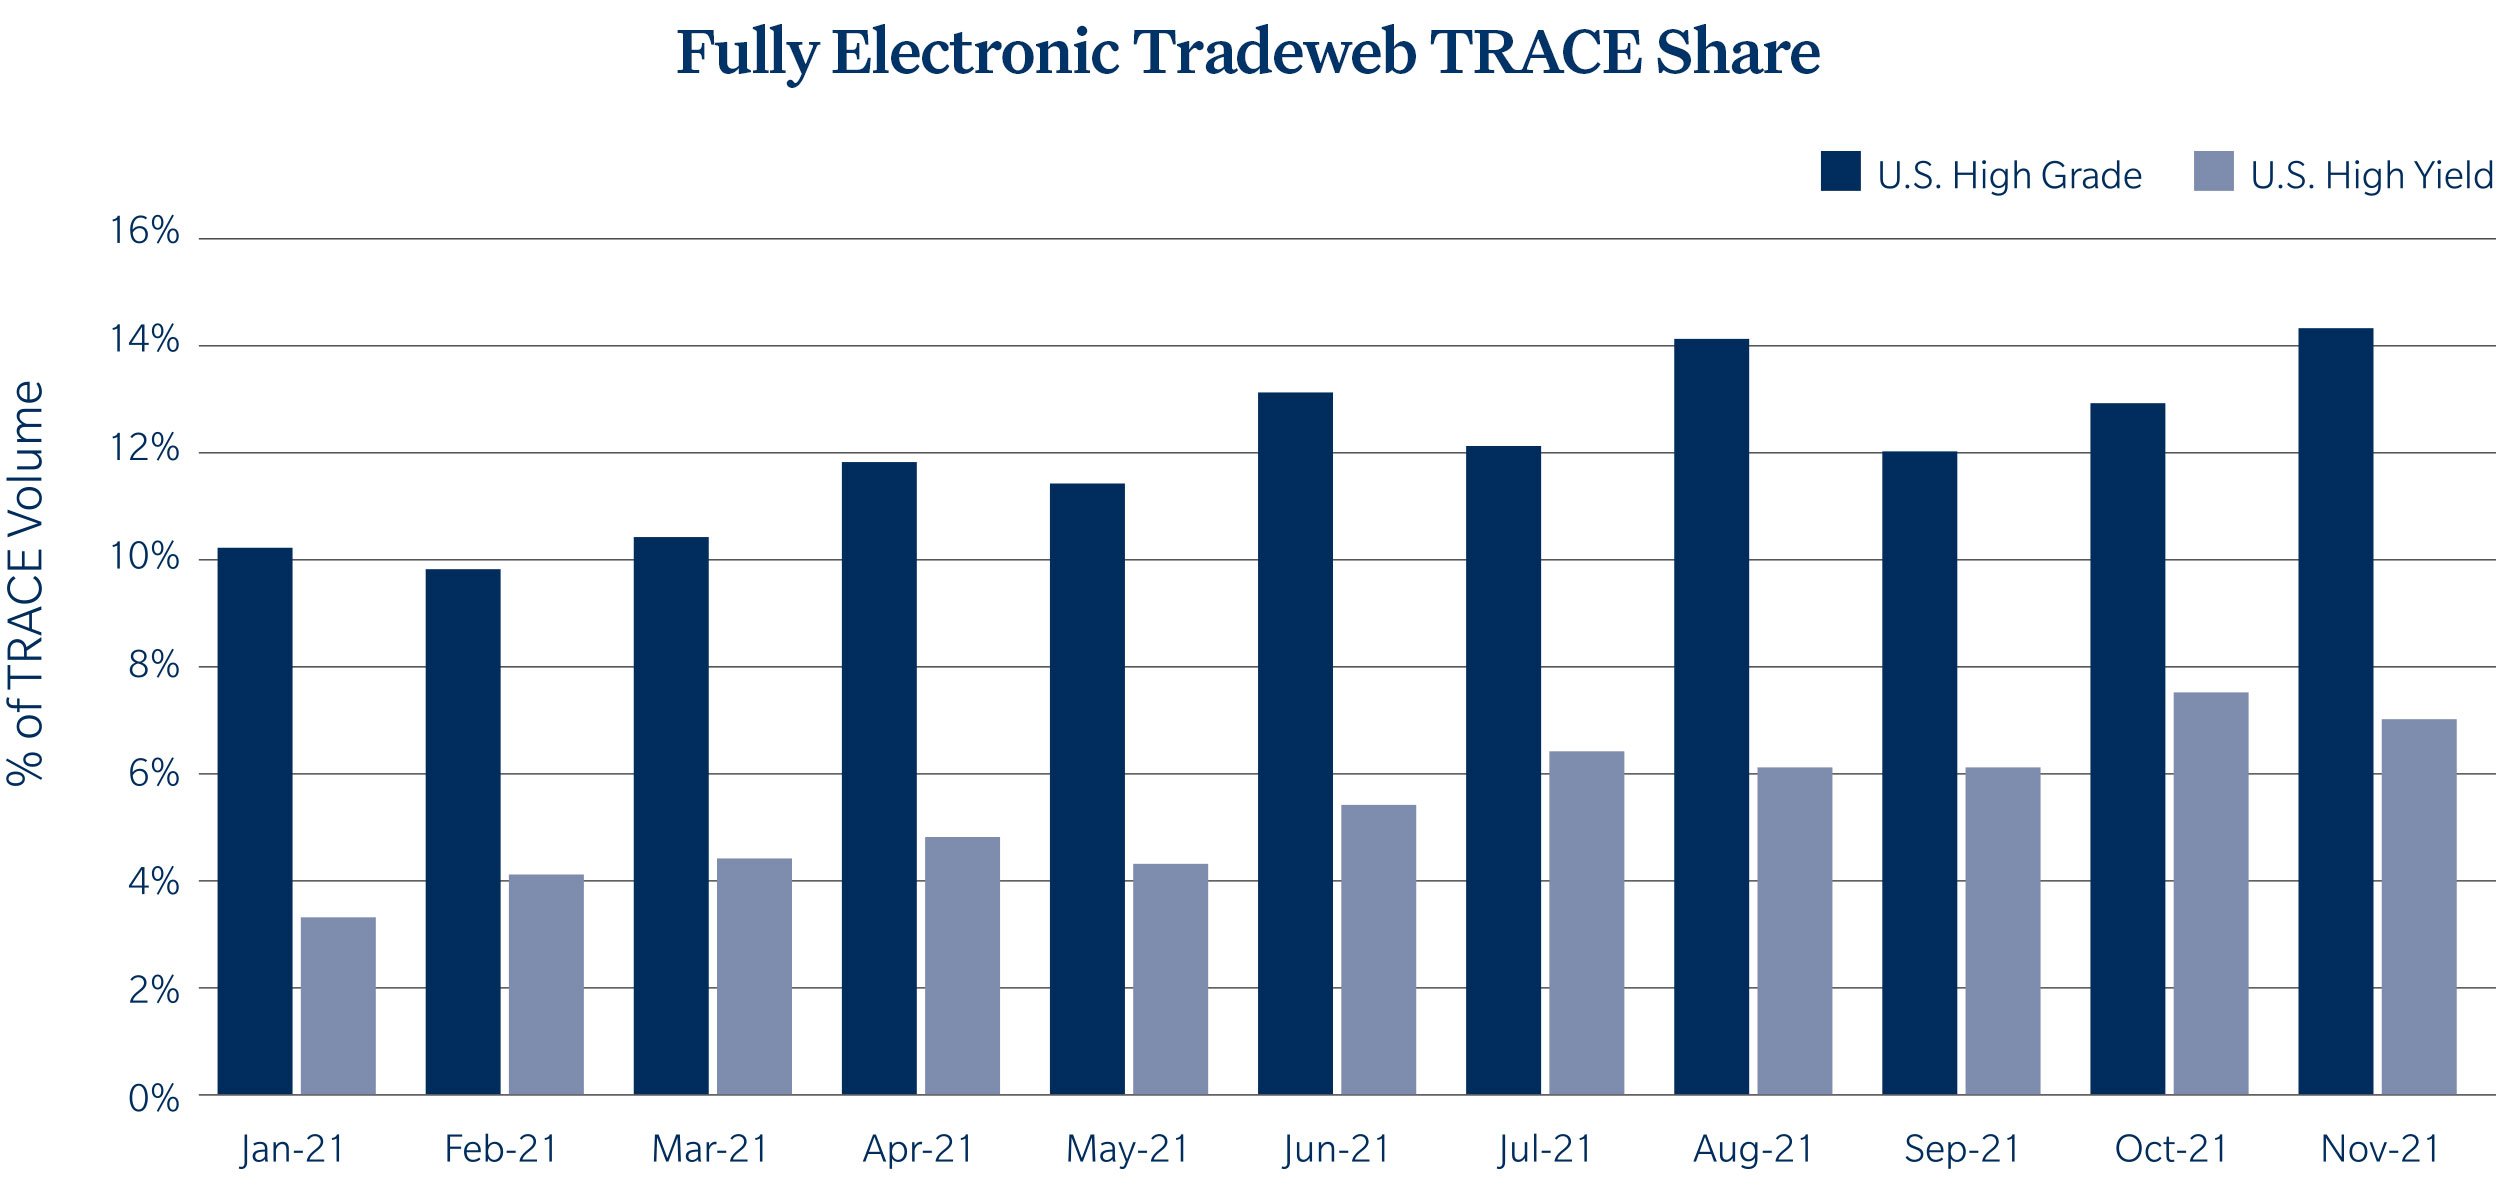 chart of fully electronic Tradeweb TRACE share